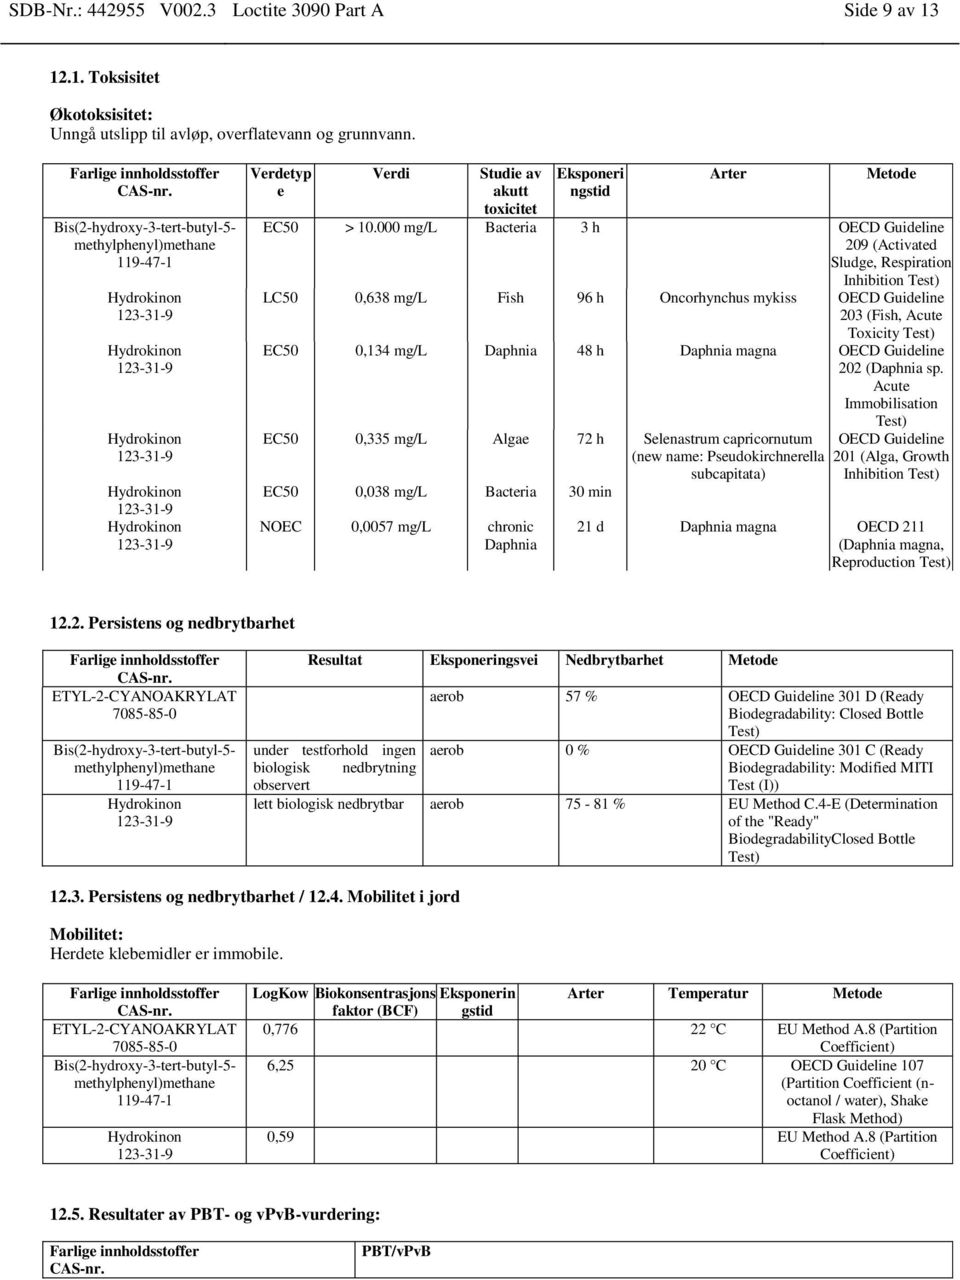 000 mg/l Bacteria 3 h OECD Guideline 209 (Activated Sludge, Respiration Inhibition Test) LC50 0,638 mg/l Fish 96 h Oncorhynchus mykiss OECD Guideline 203 (Fish, Acute Toxicity Test) EC50 0,134 mg/l